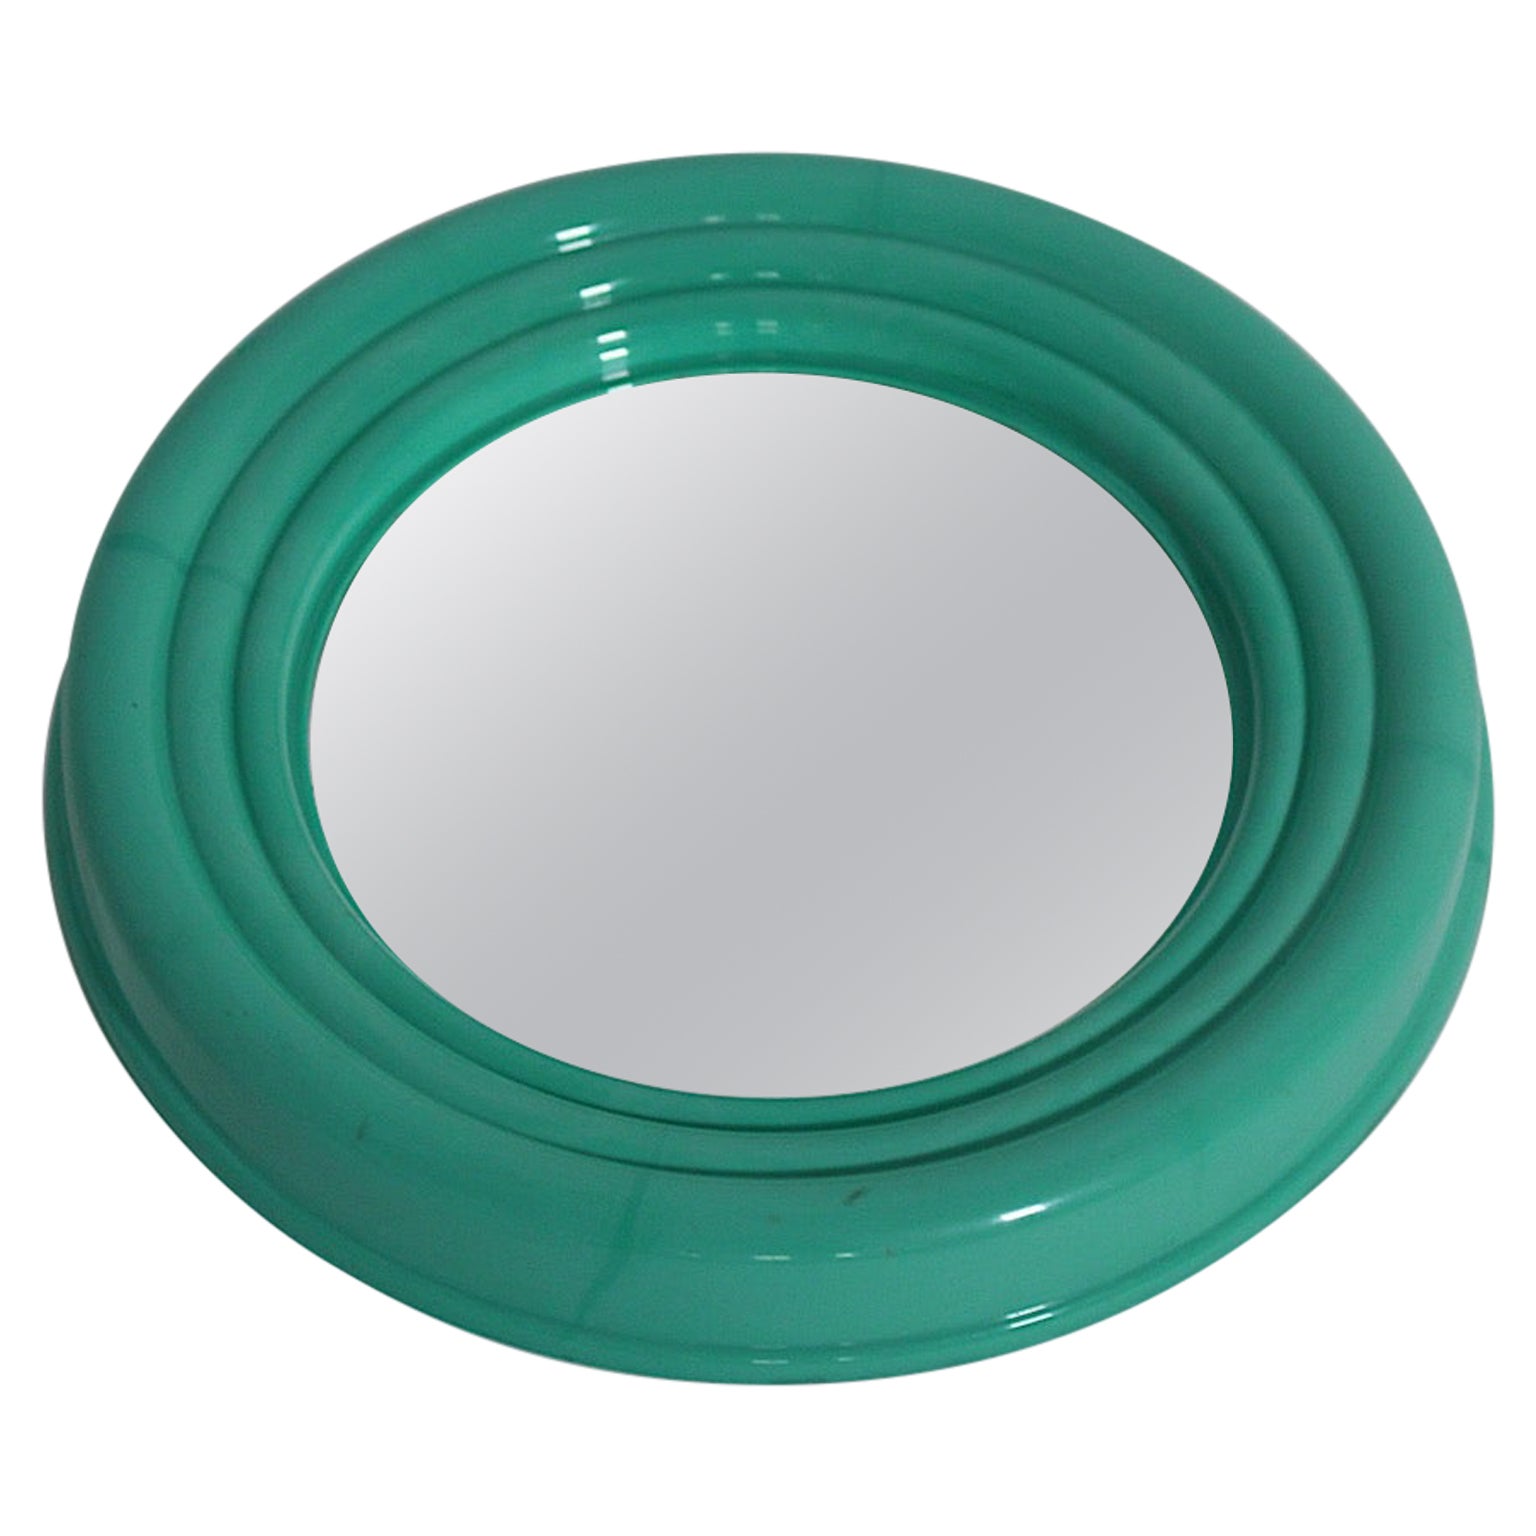 Pop Art Style Green Teal Circular Plastic Wall Mirror 1990s Italy For Sale